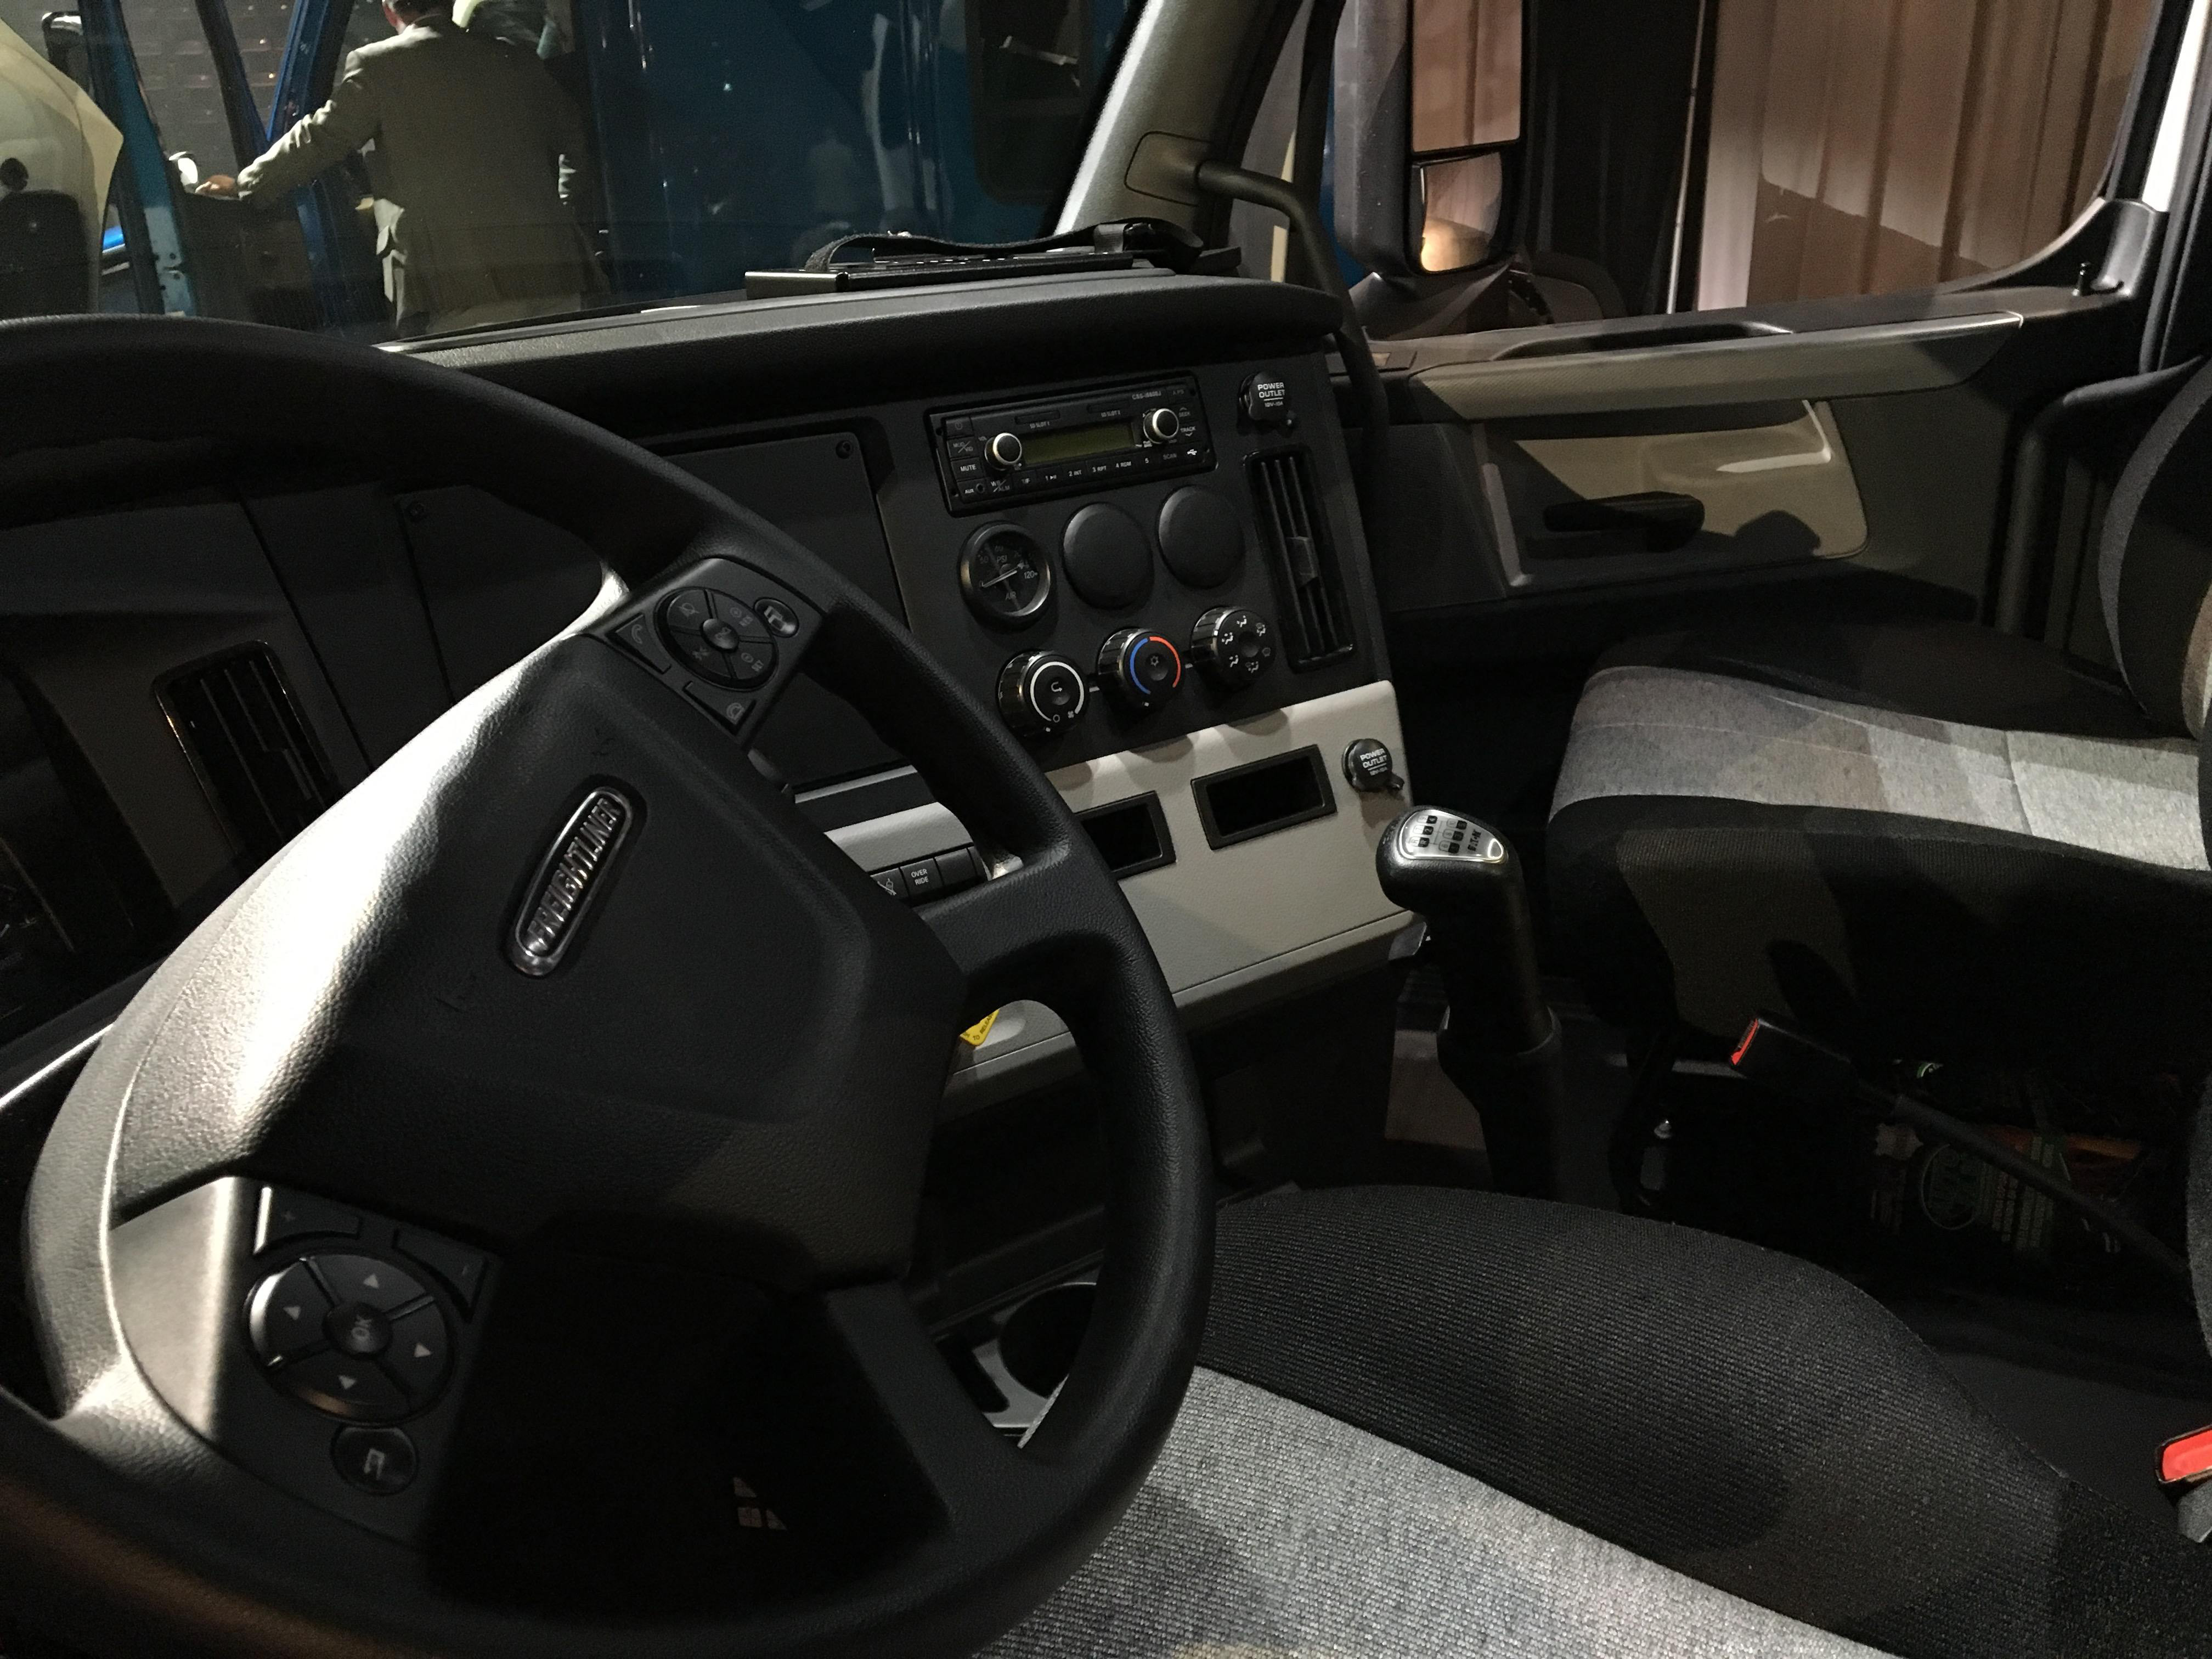 Freightliner Introduces Redesigned Cascadia With Driver